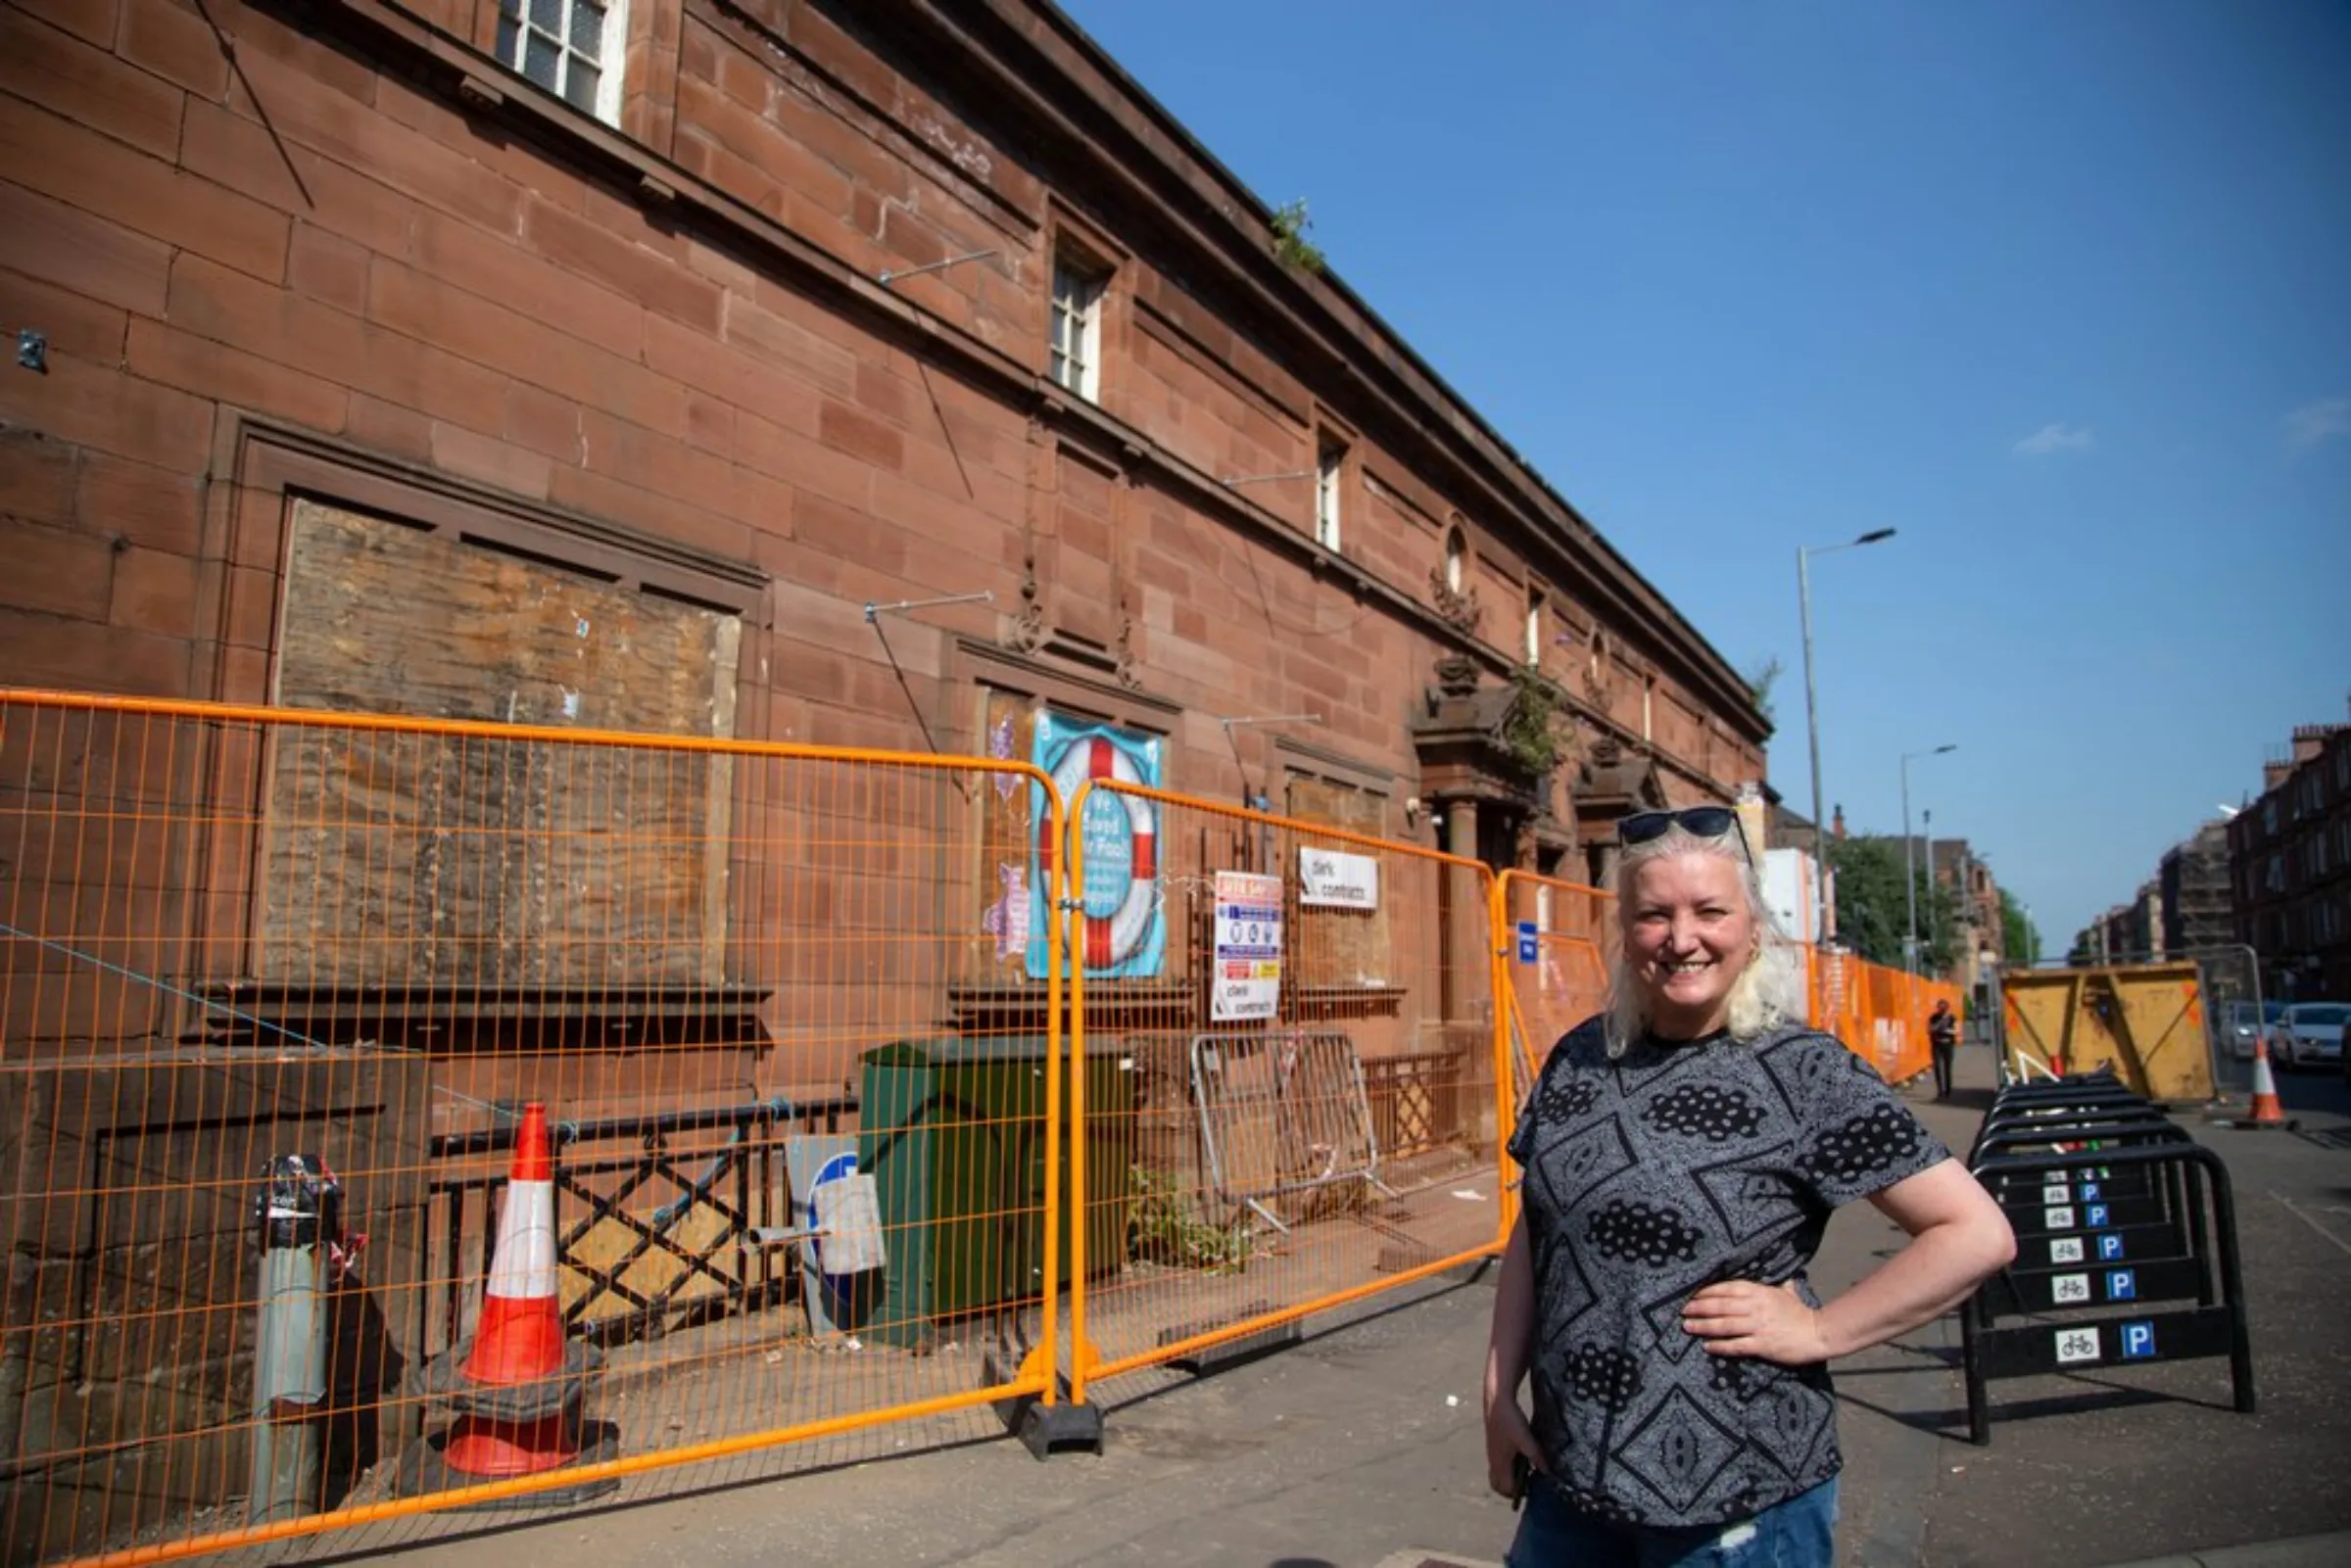 Fatima Uygun, who manages the Govanhill Baths Community Trust, invested into a solar panel installation for Glendale Primary School in Glasgow, and will see her stake returned – and get a voice in how profits from it are spent in the community - as the project pays for itself in Glasgow, United Kingdom, July 21, 2021